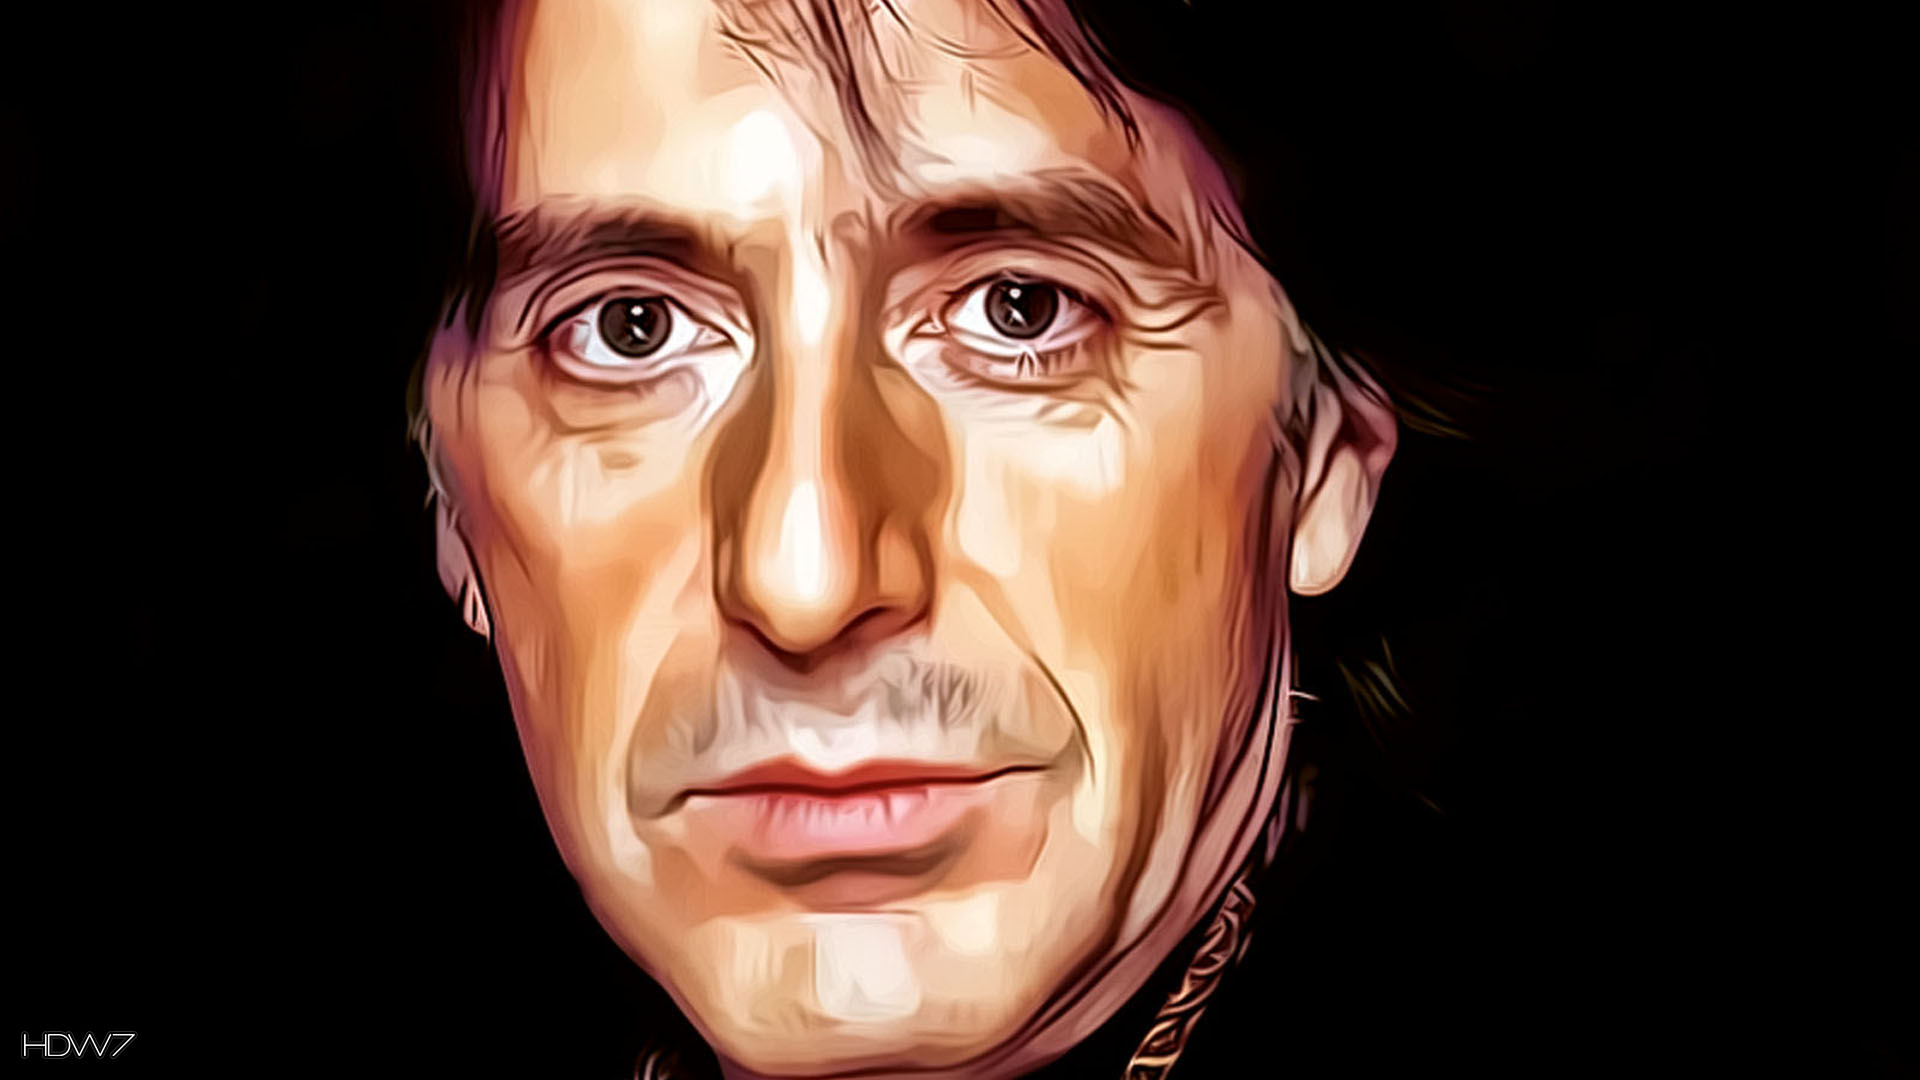 Al Pacino Painting - Actors Painting Images Hd , HD Wallpaper & Backgrounds